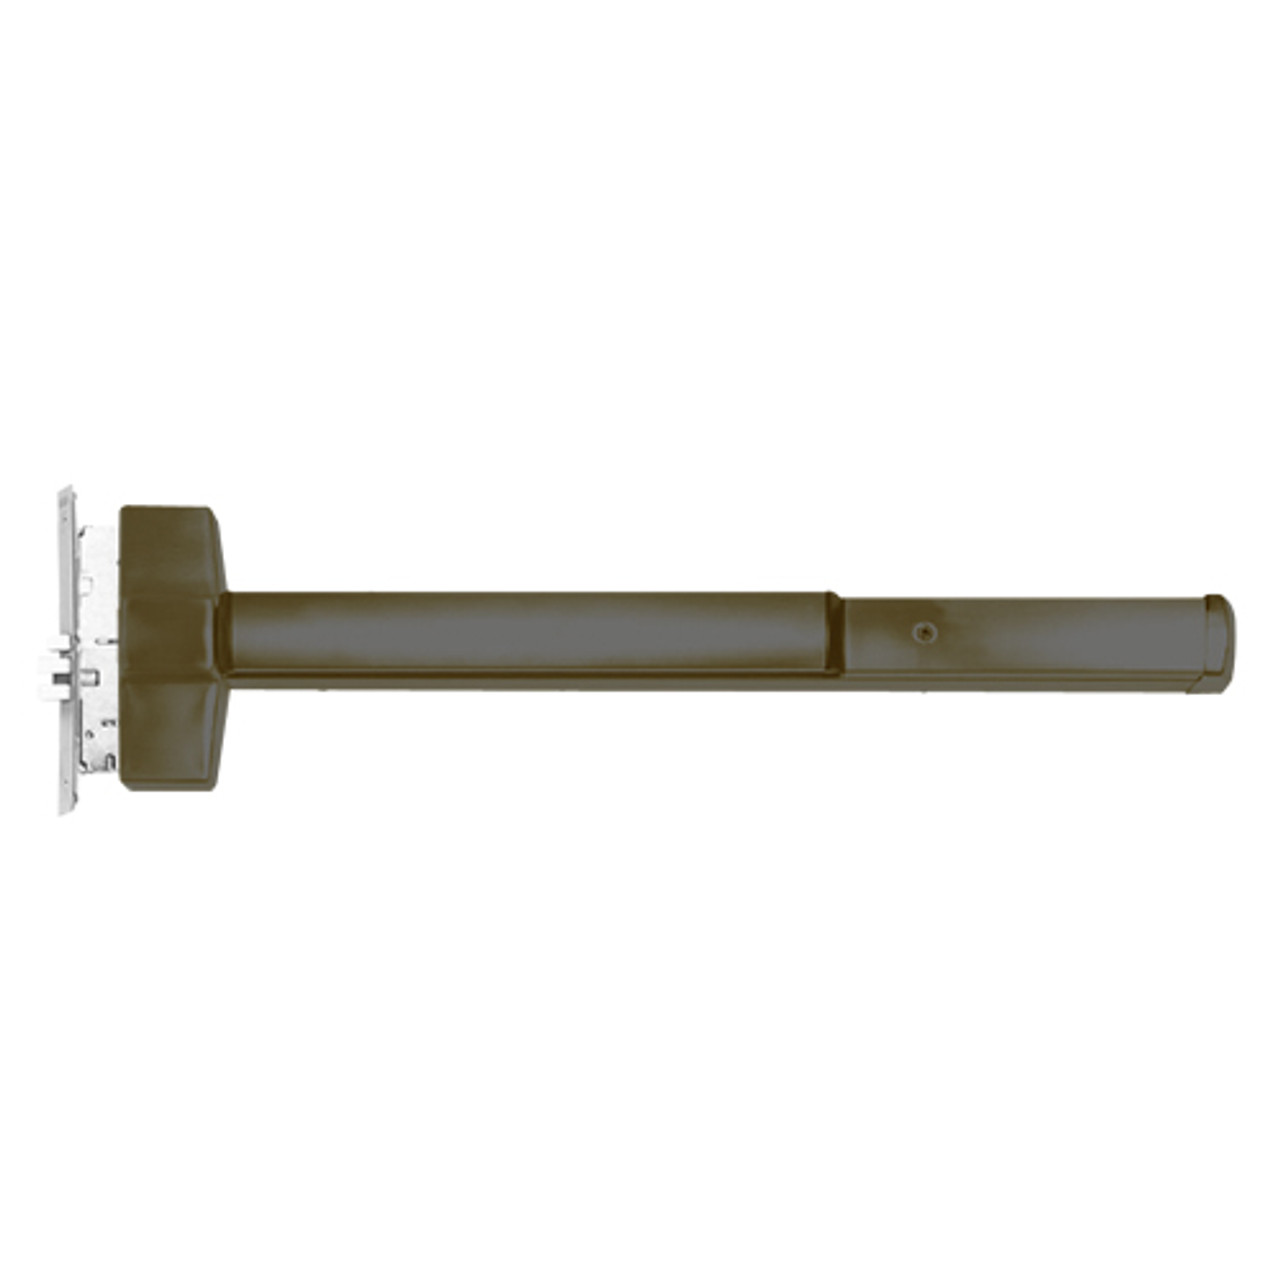 ED5657T-613-RHR Corbin ED5600 Series Non Fire Rated Mortise Exit Device in Oil Rubbed Bronze Finish